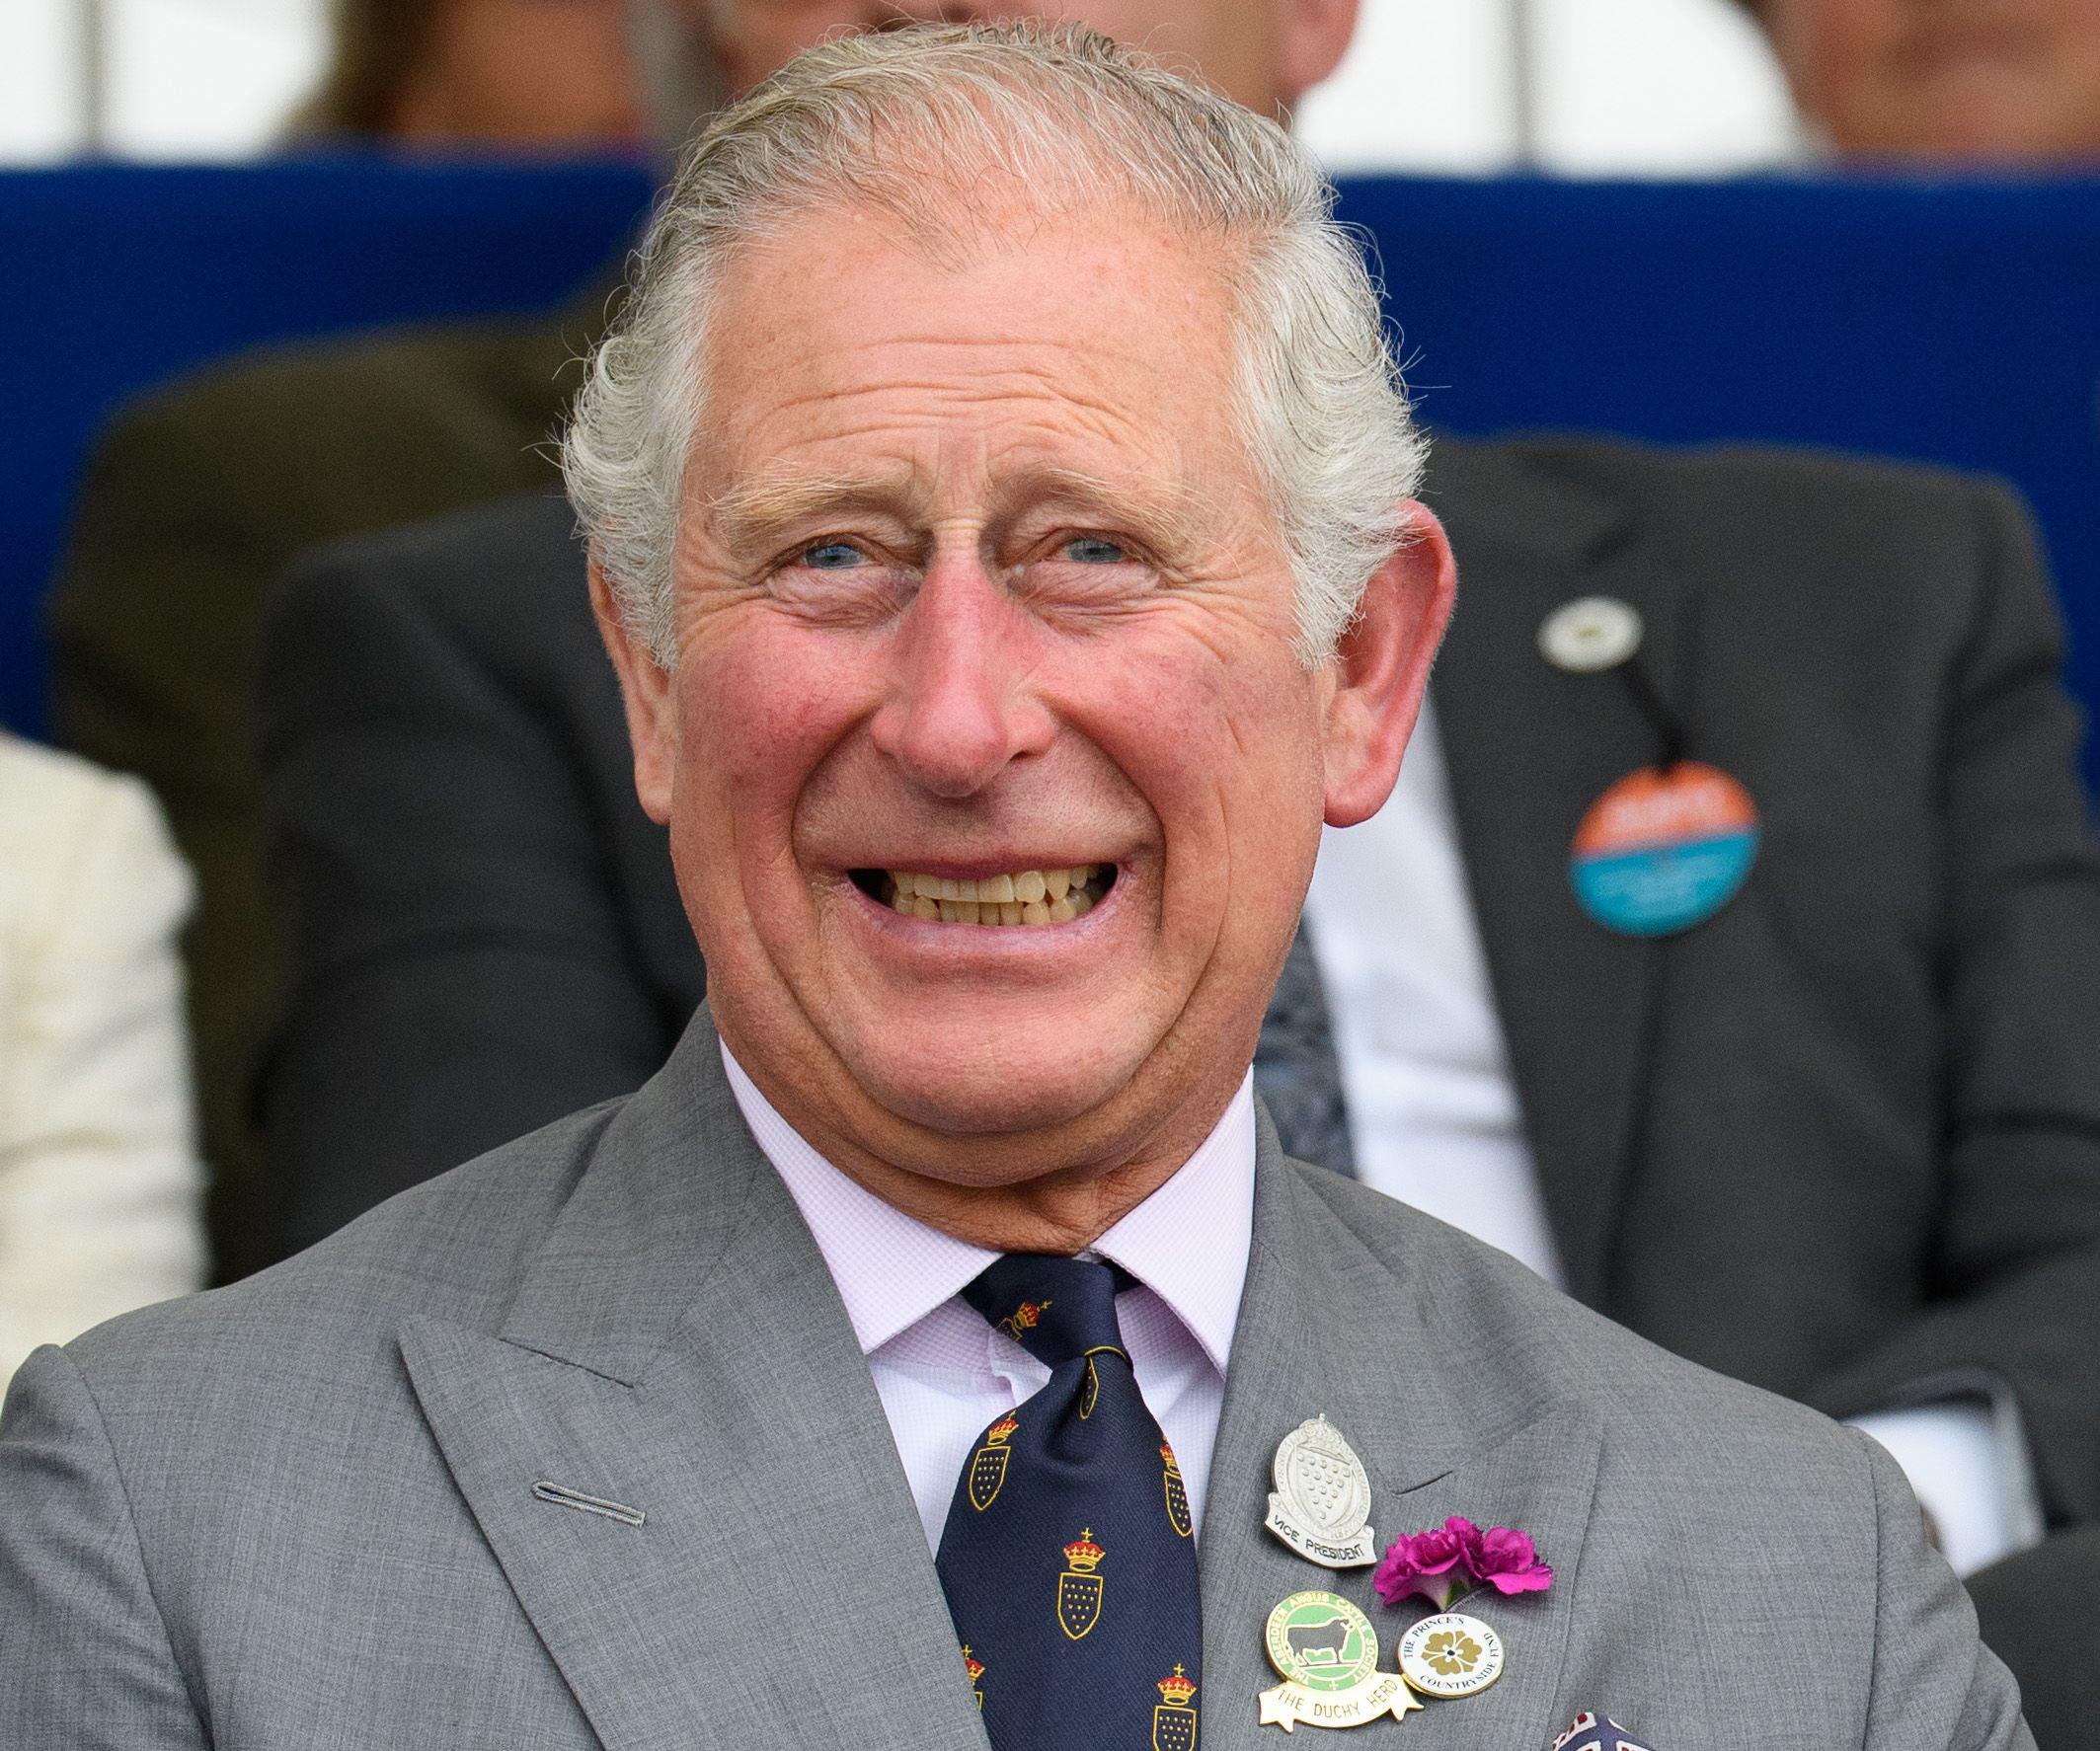 This sweet thing Prince Charles does with his grandchildren will make you melt